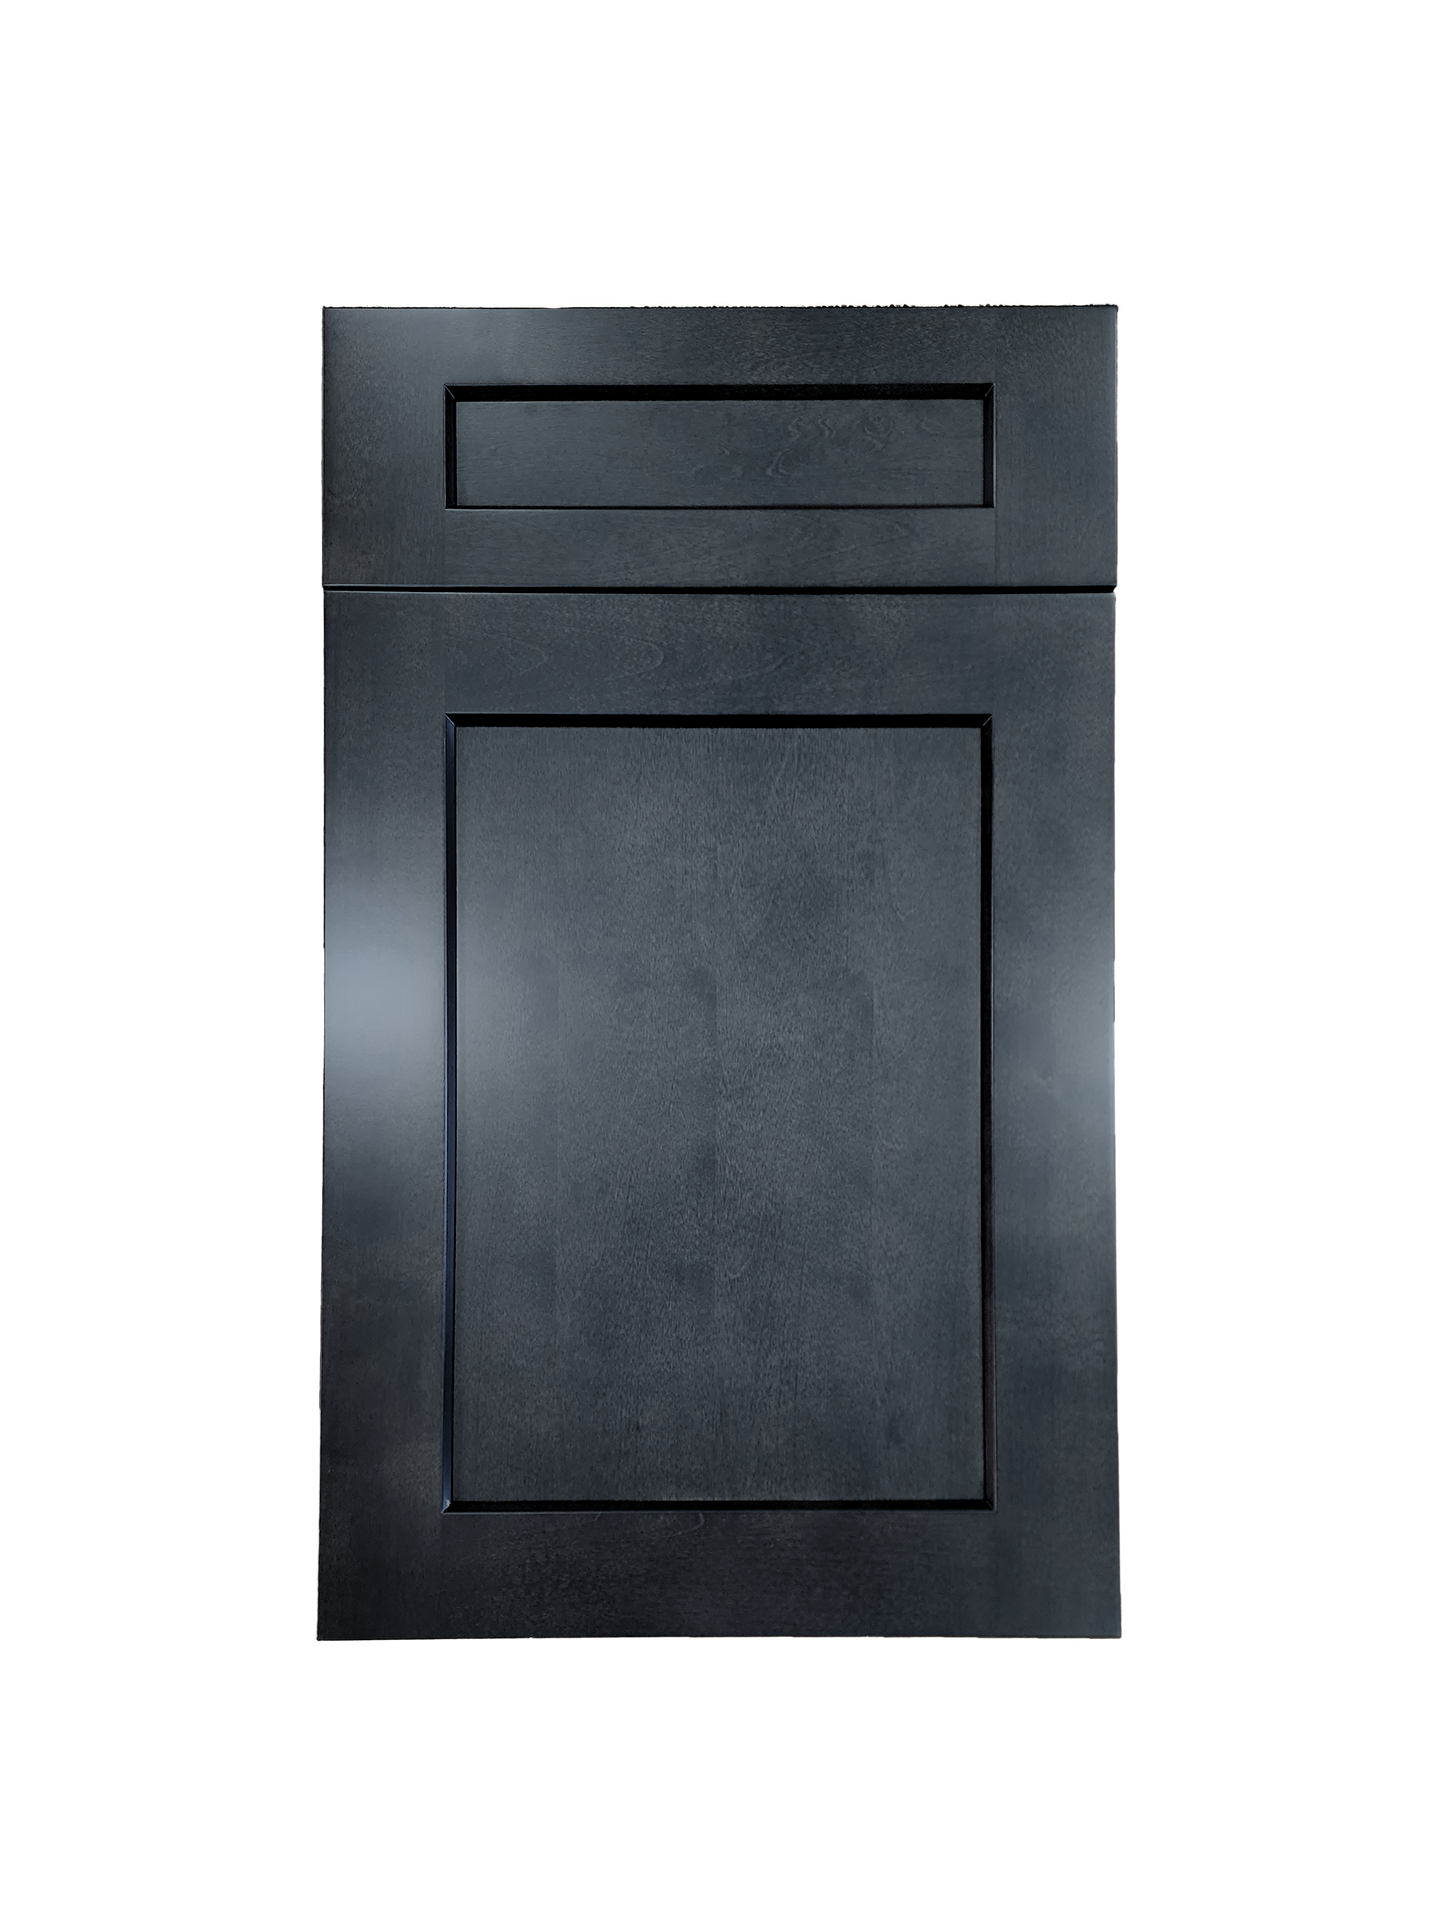 Stormy Grey Wall Cabinet 30 inches wide 12 inches deep 36 inches tall with Stormy Grey box and Stormy Grey doors